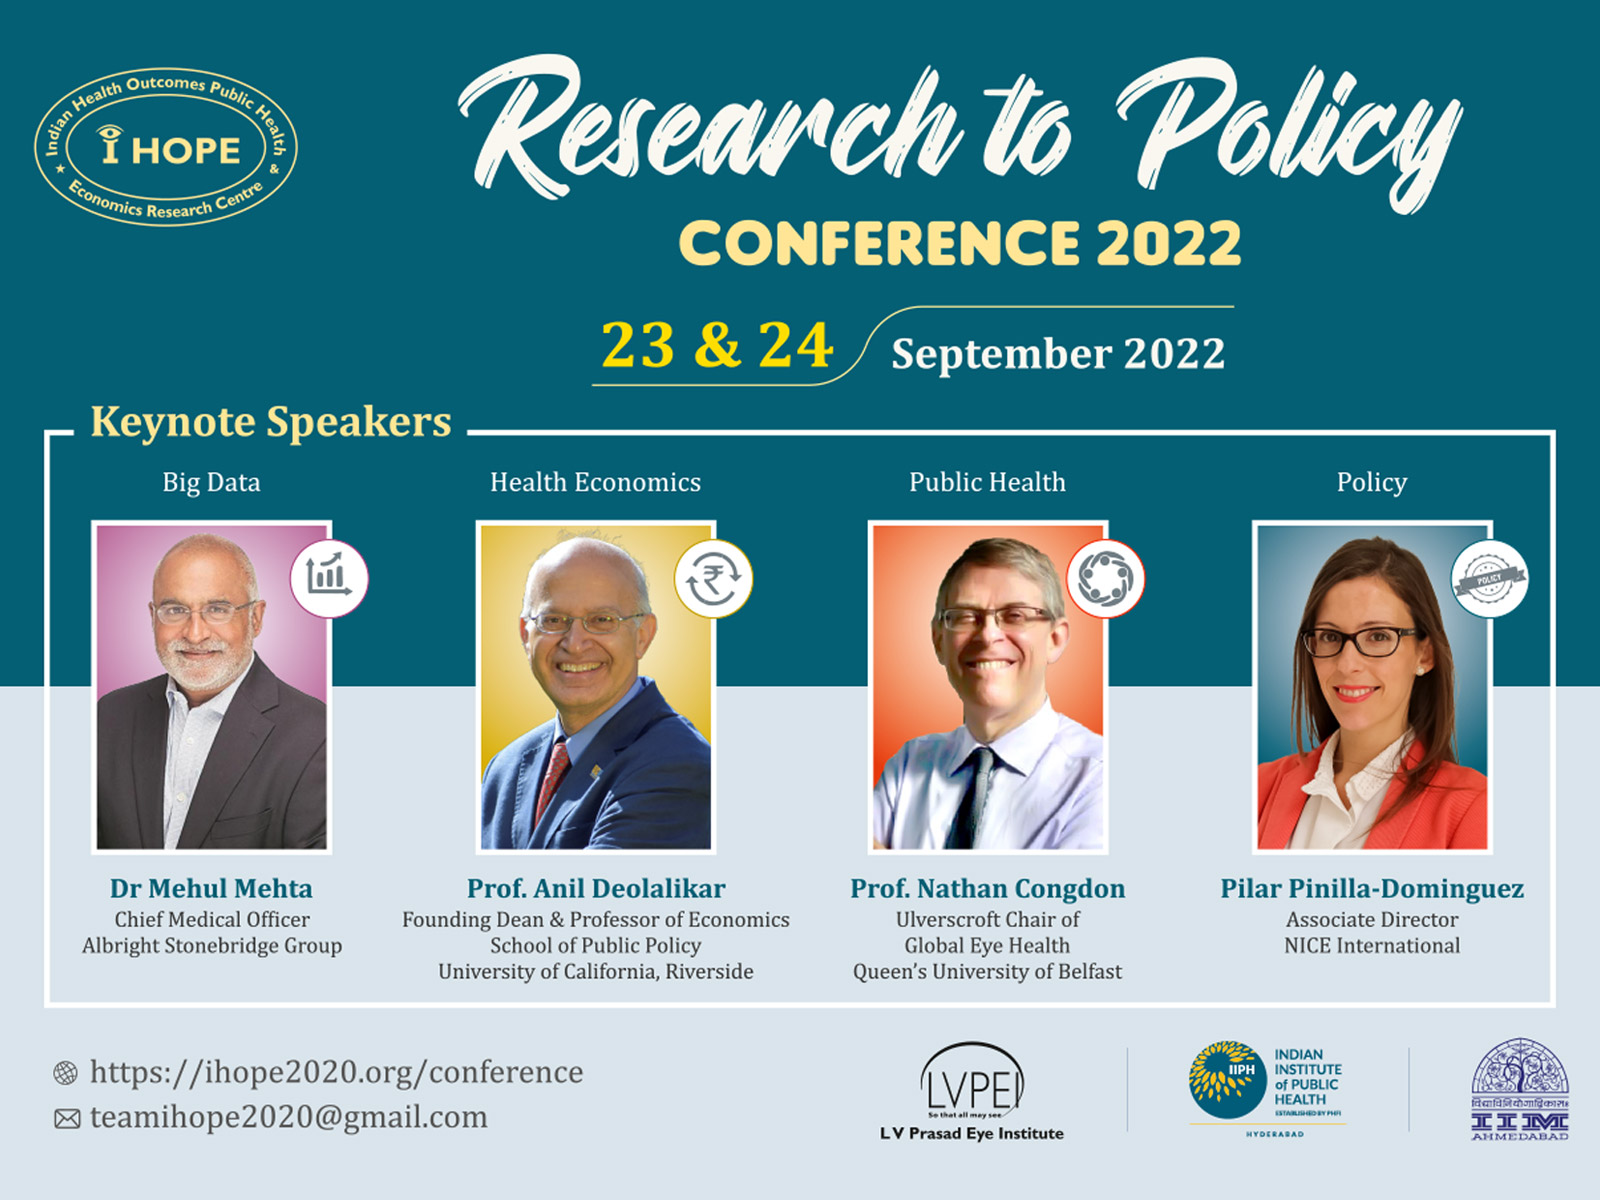 Research to Policy Conference 2022